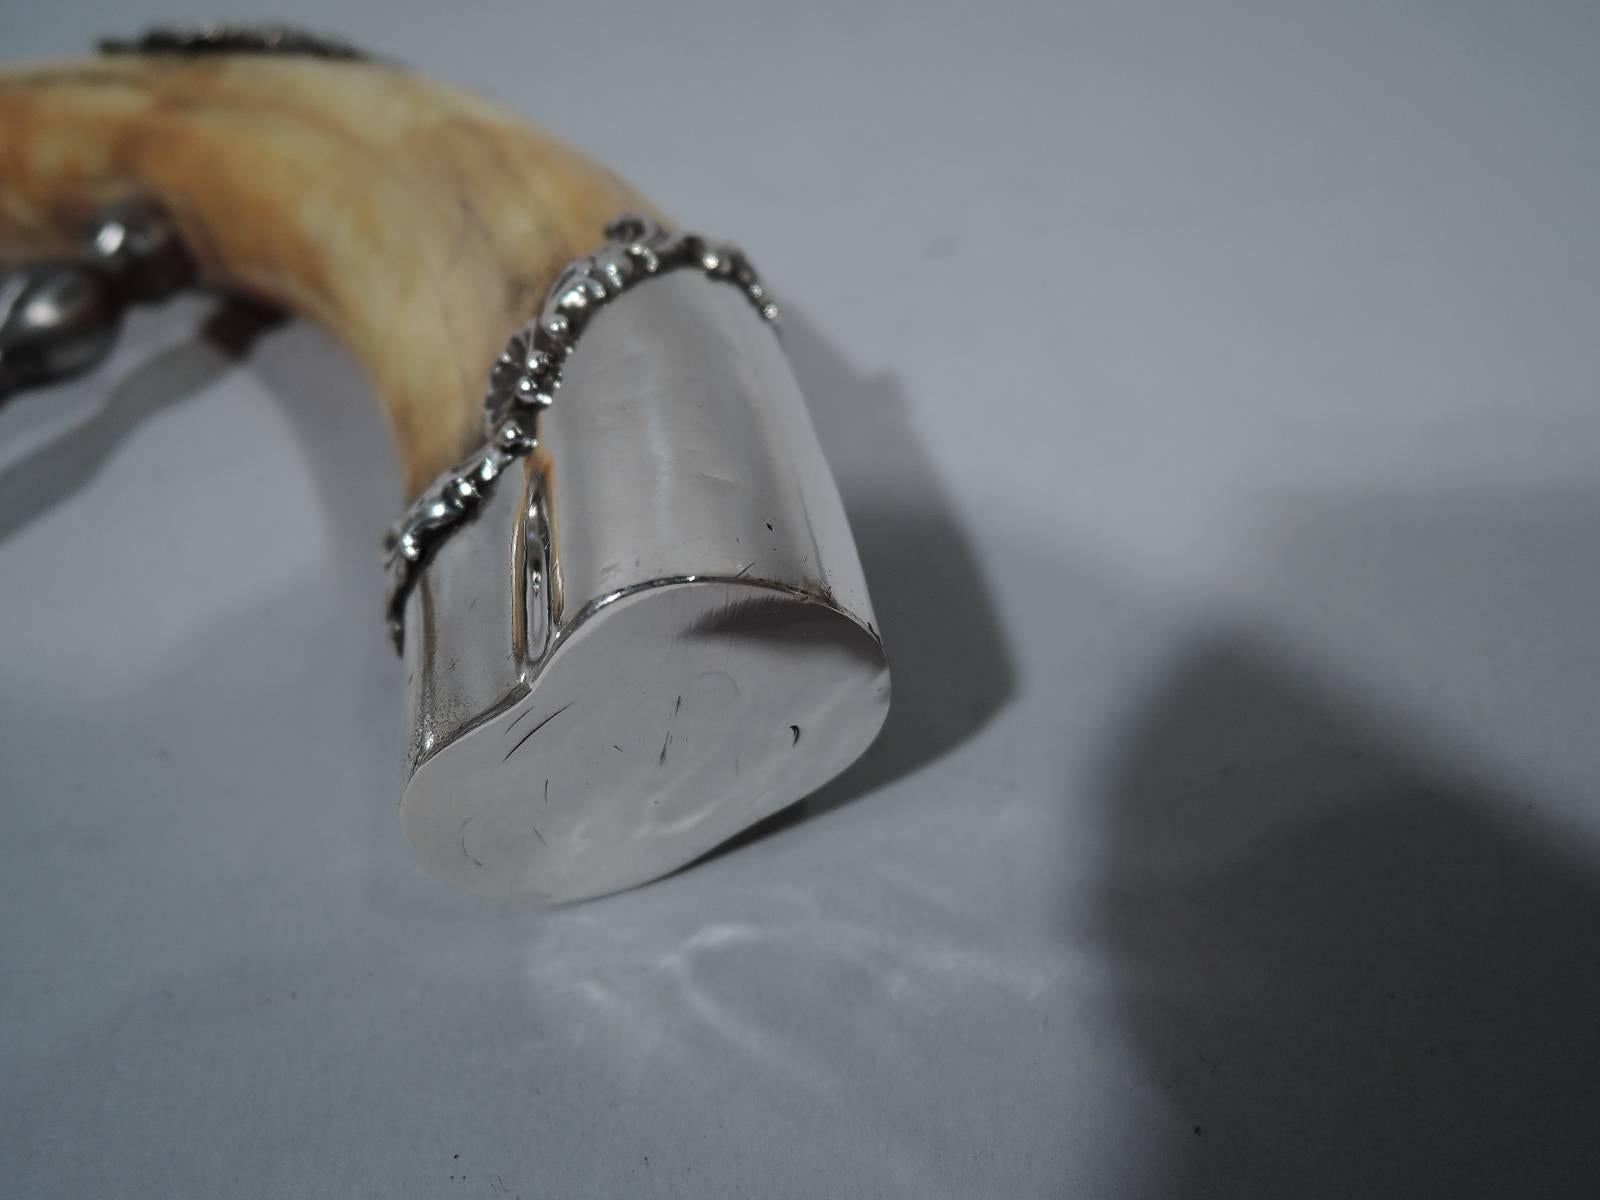 Lady’s size American sterling silver corkscrew with tusk handle, circa 1900. Tusk has sterling silver mounts with flower and shell rims. Top mount has loose ring. Makes a great belt attachment. The perfect accessory for book group night. Hallmarked